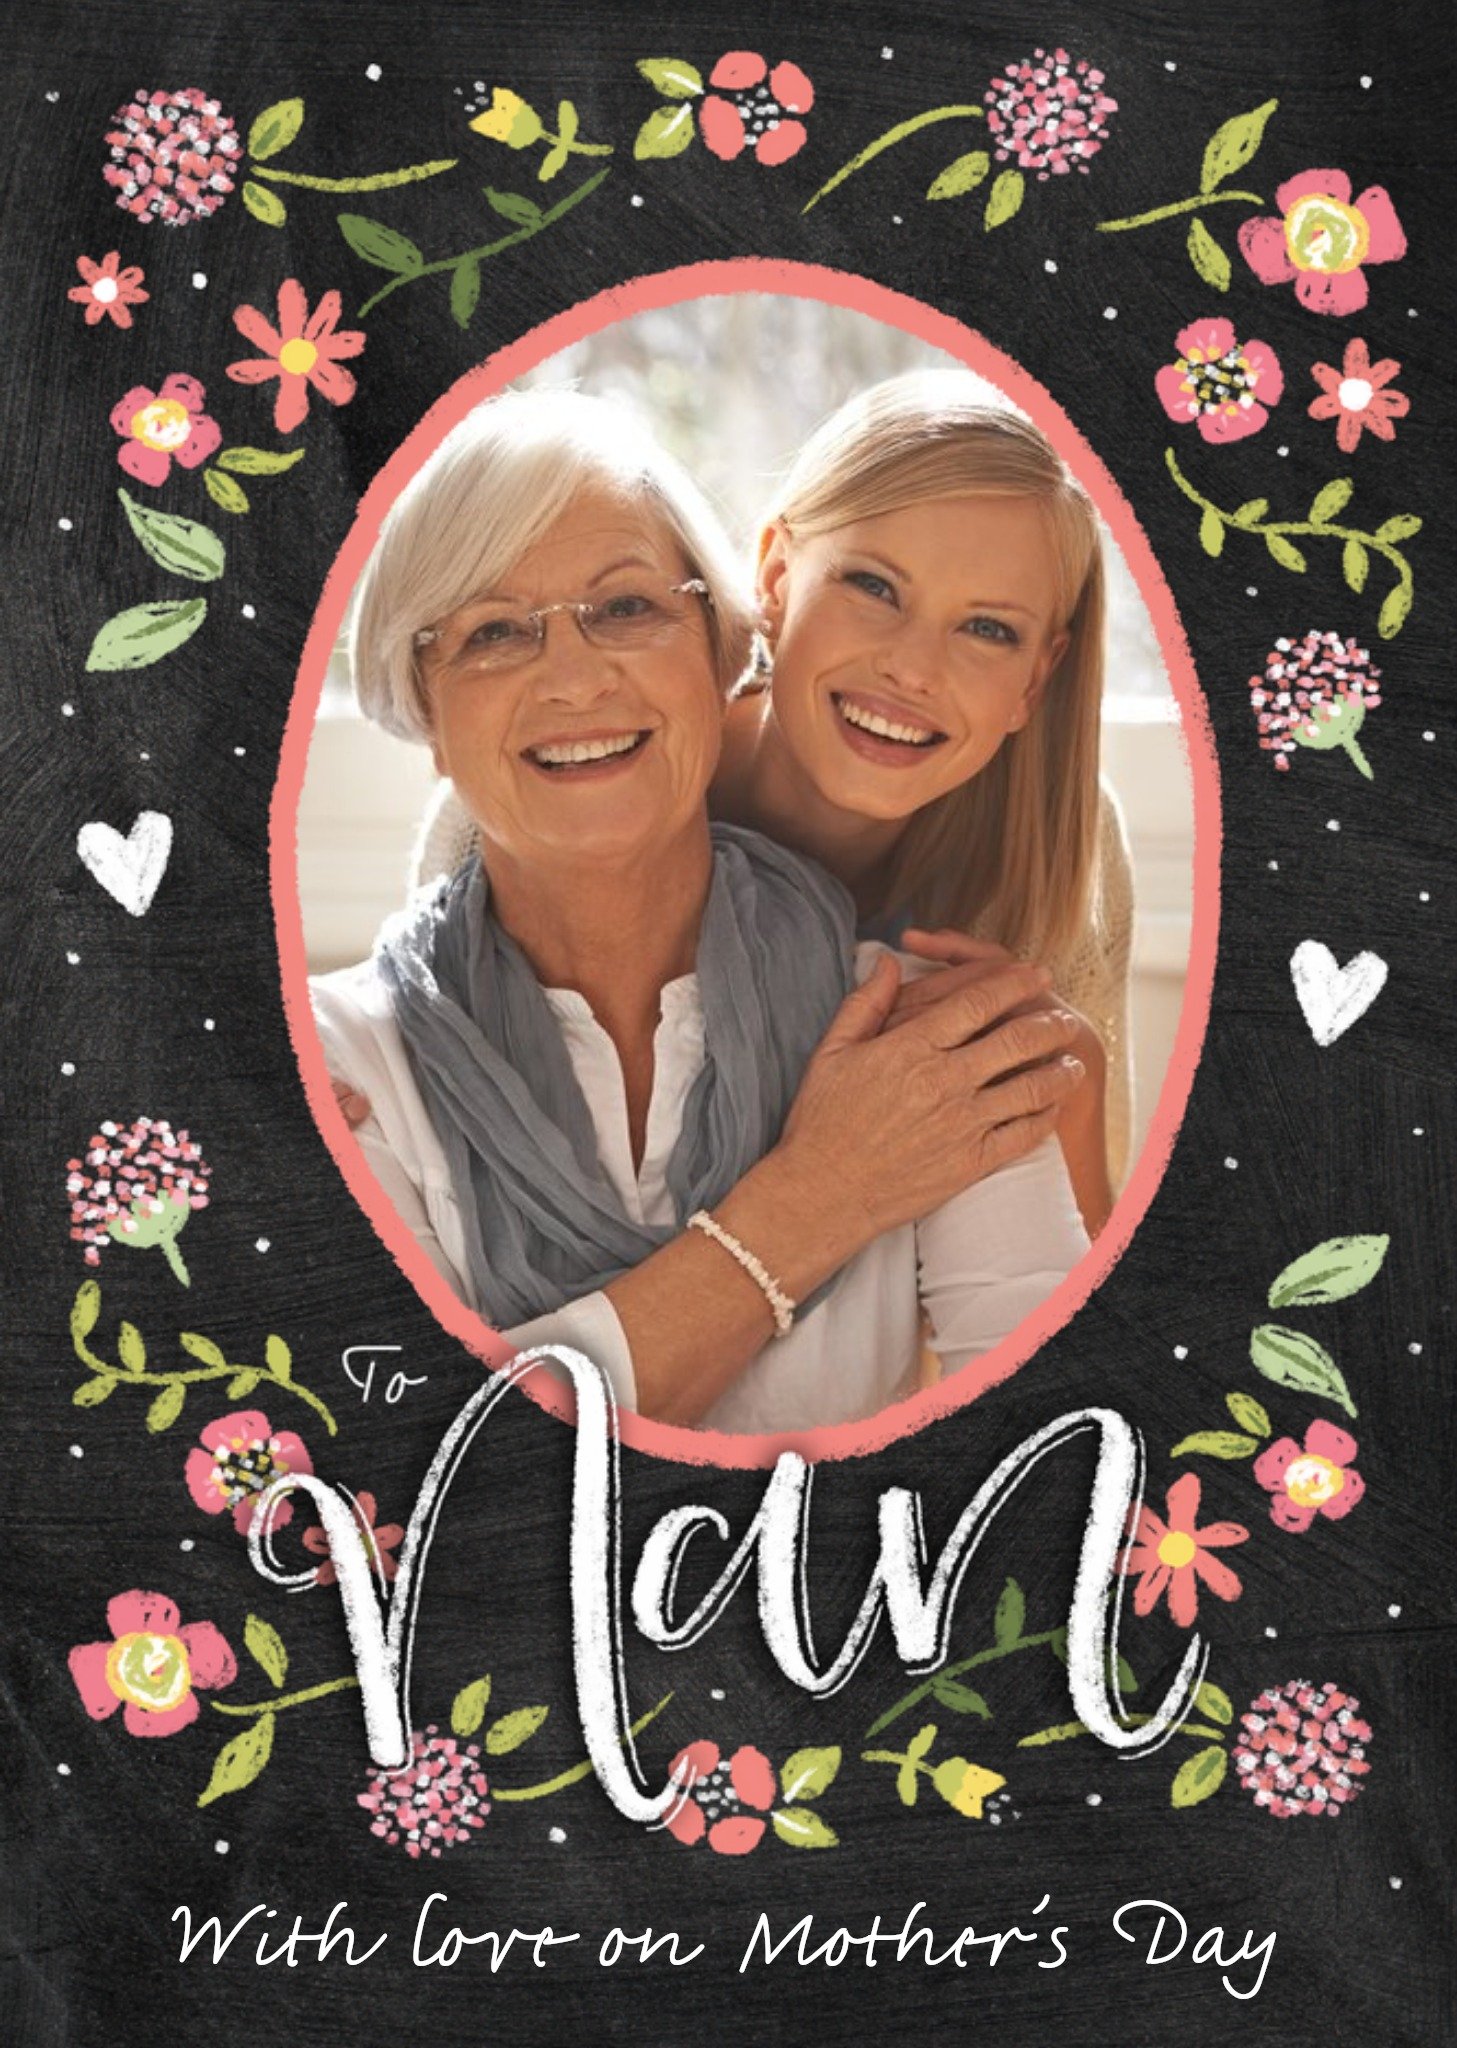 Moonpig Peony Print Nan With Love On Mother's Day Photo Card Ecard